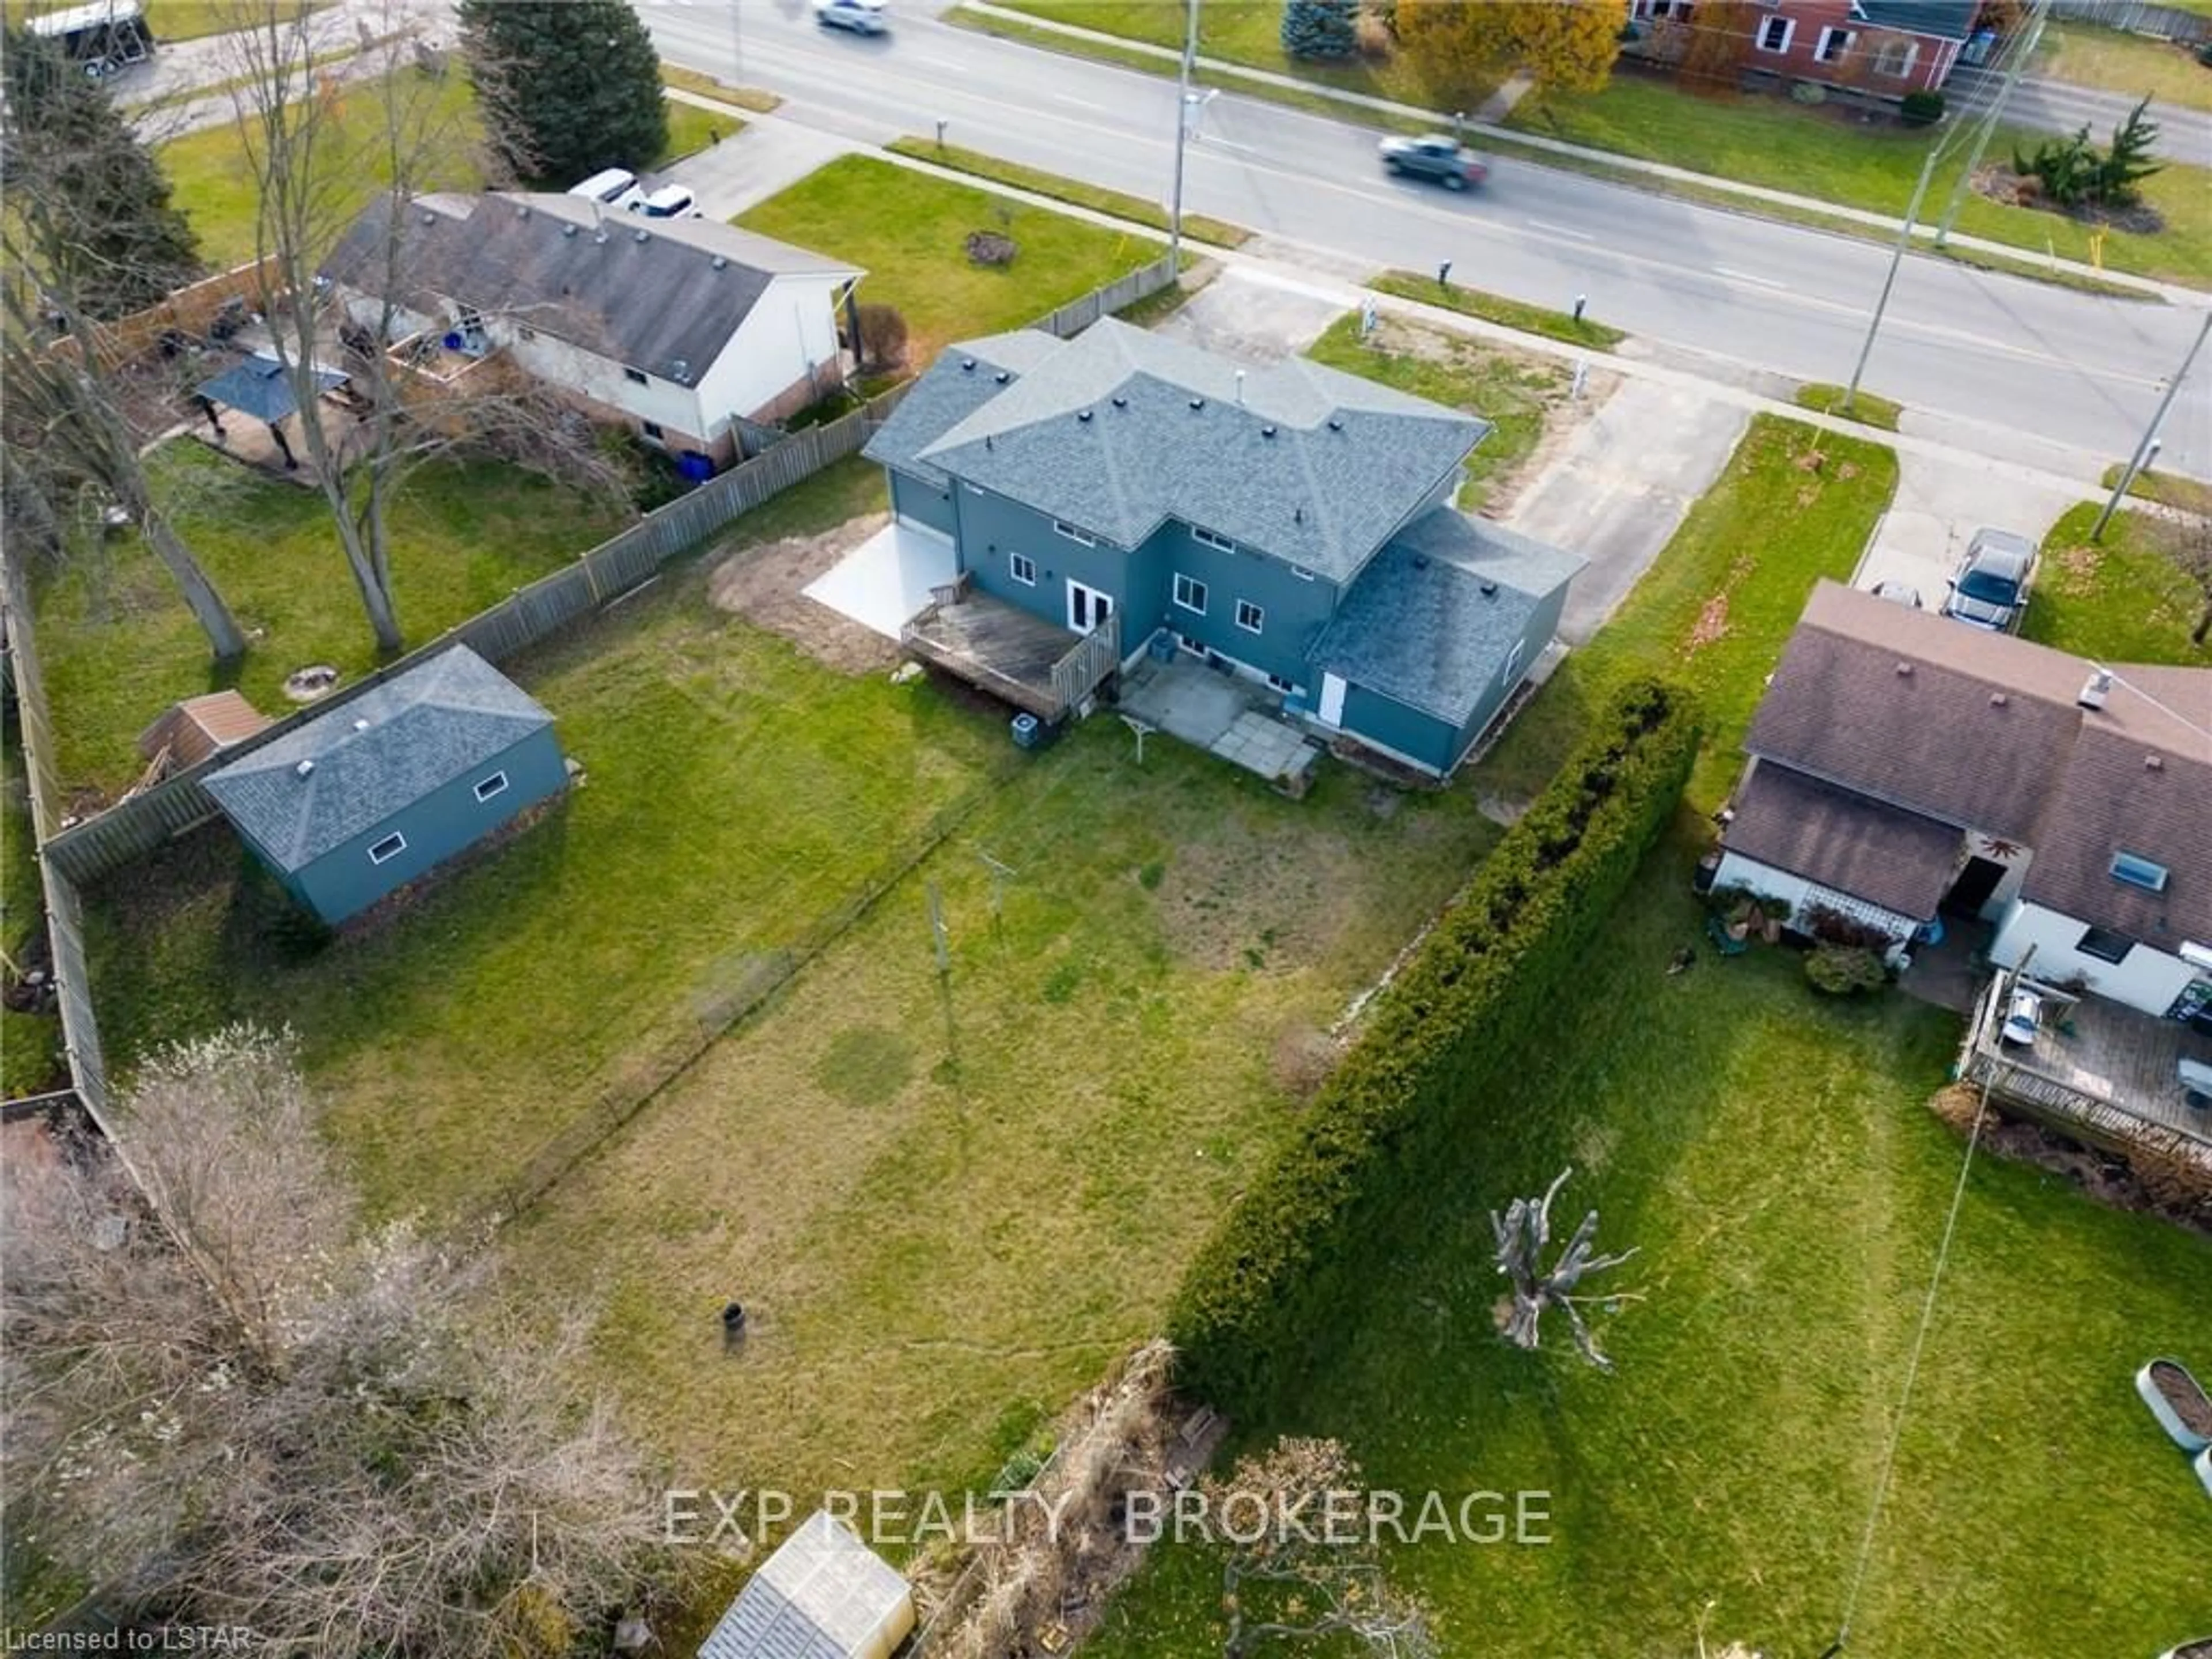 Frontside or backside of a home for 22268 Adelaide St, Strathroy-Caradoc Ontario N0L 1W0